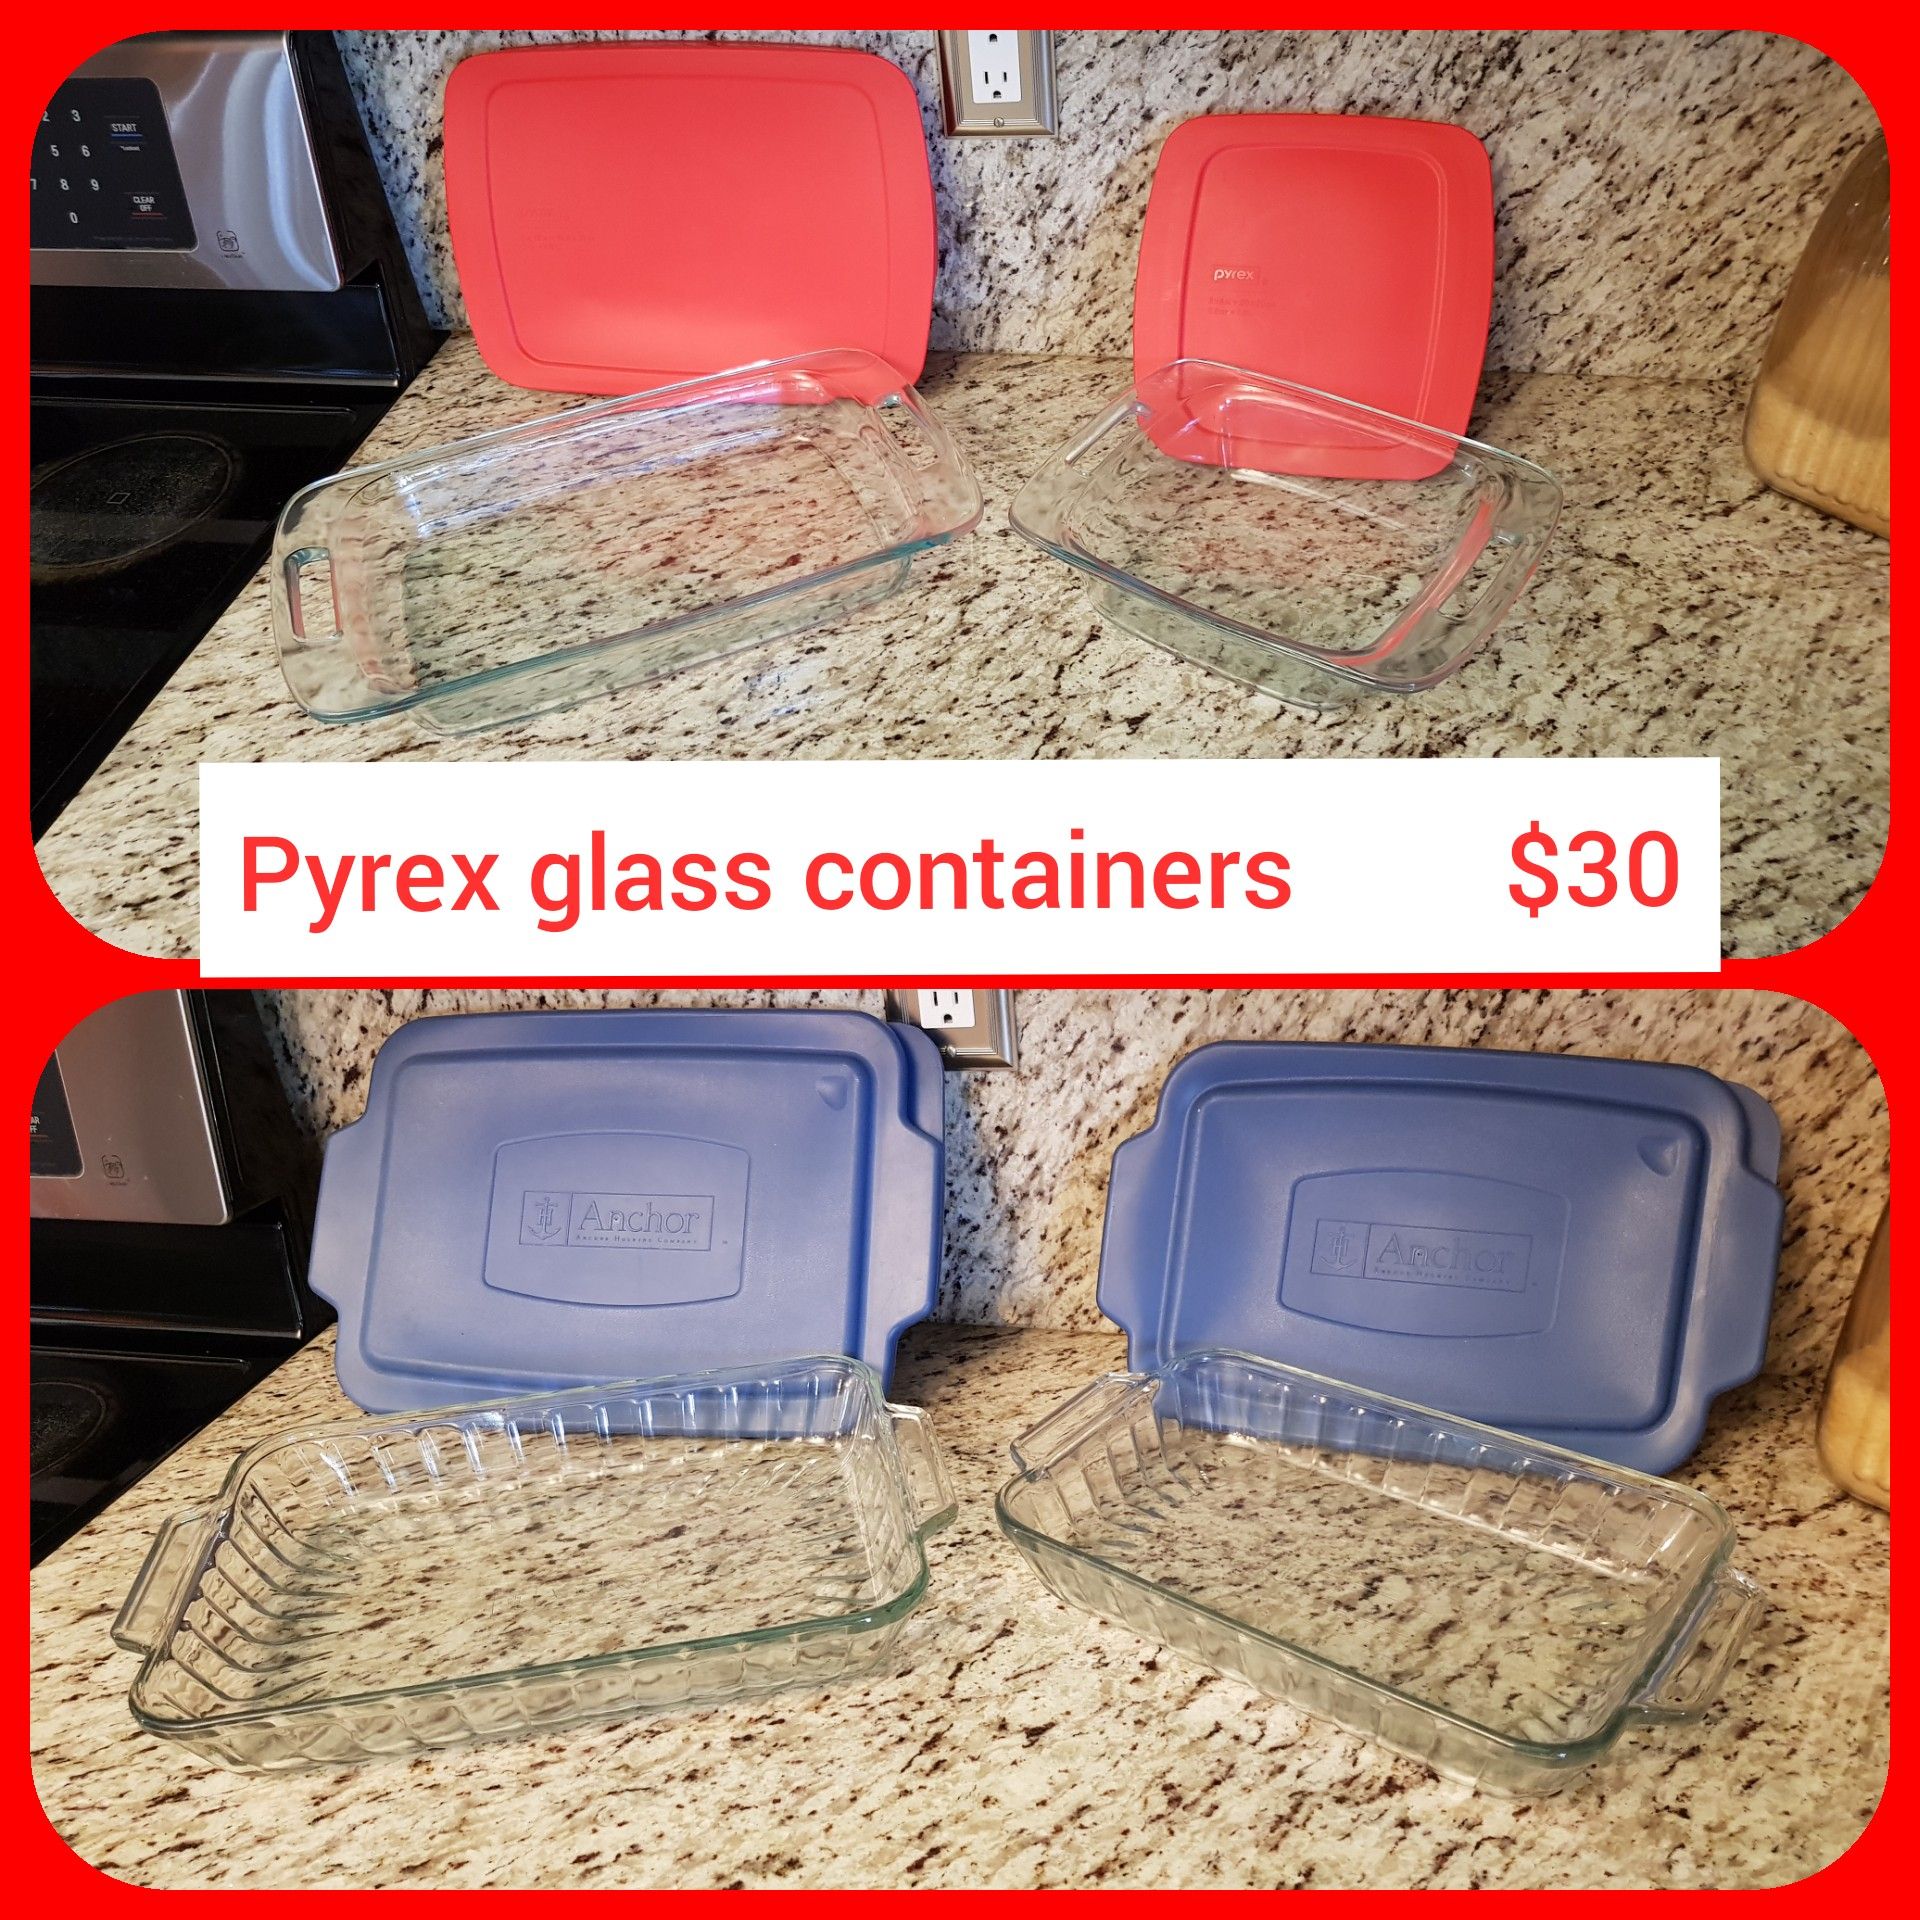 Pyrex glass containers , casserole dishes